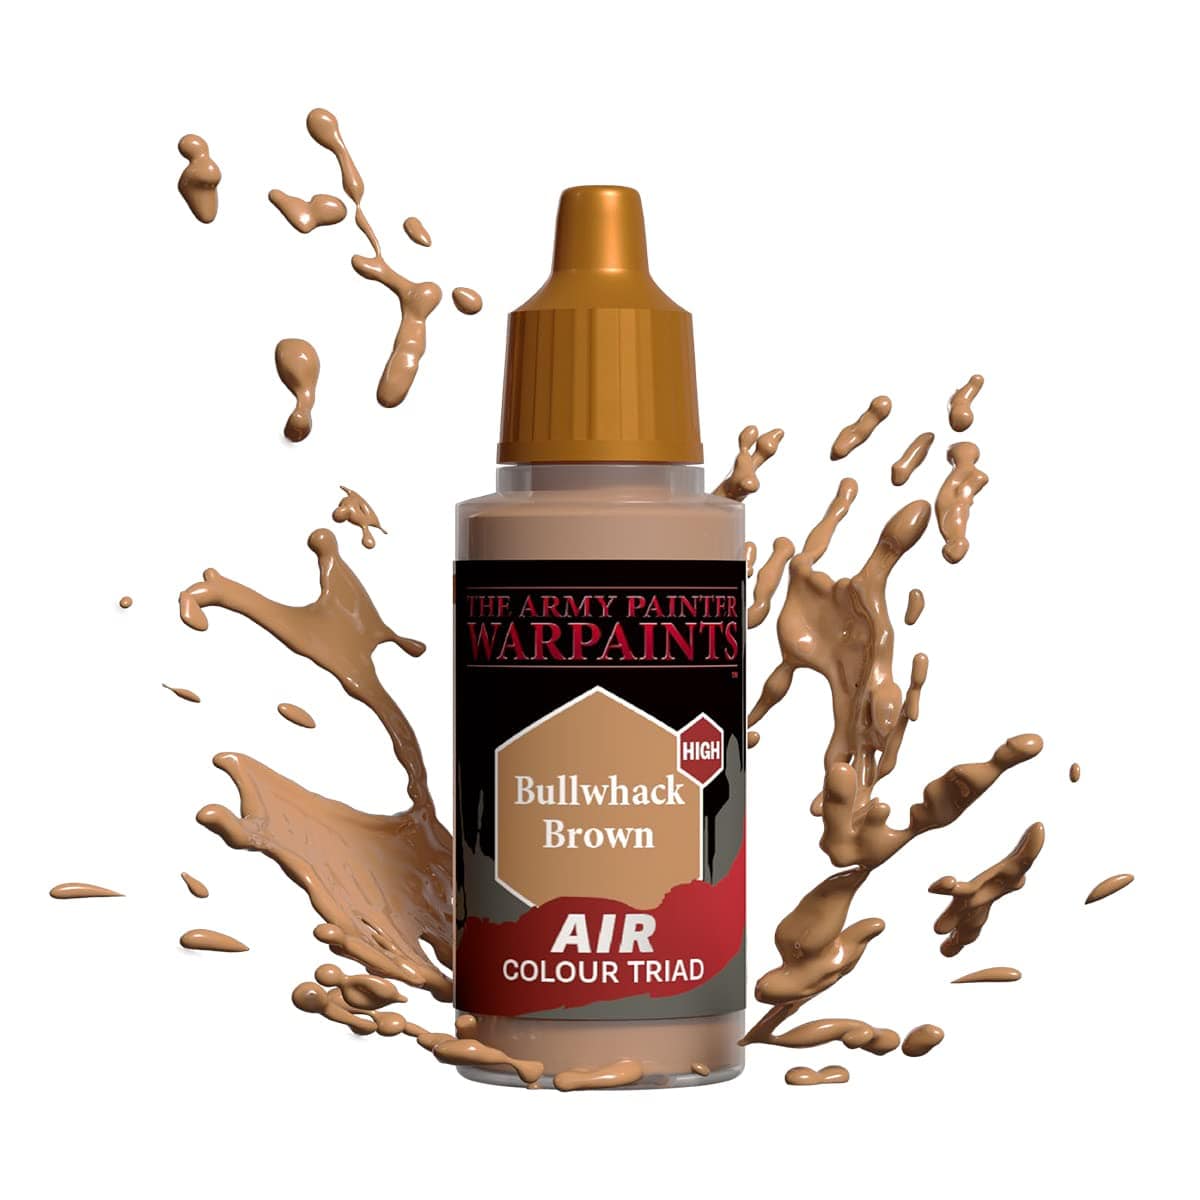 The Army Painter Accessories The Army Painter Warpaints Air: Bullwhack Brown 18ml